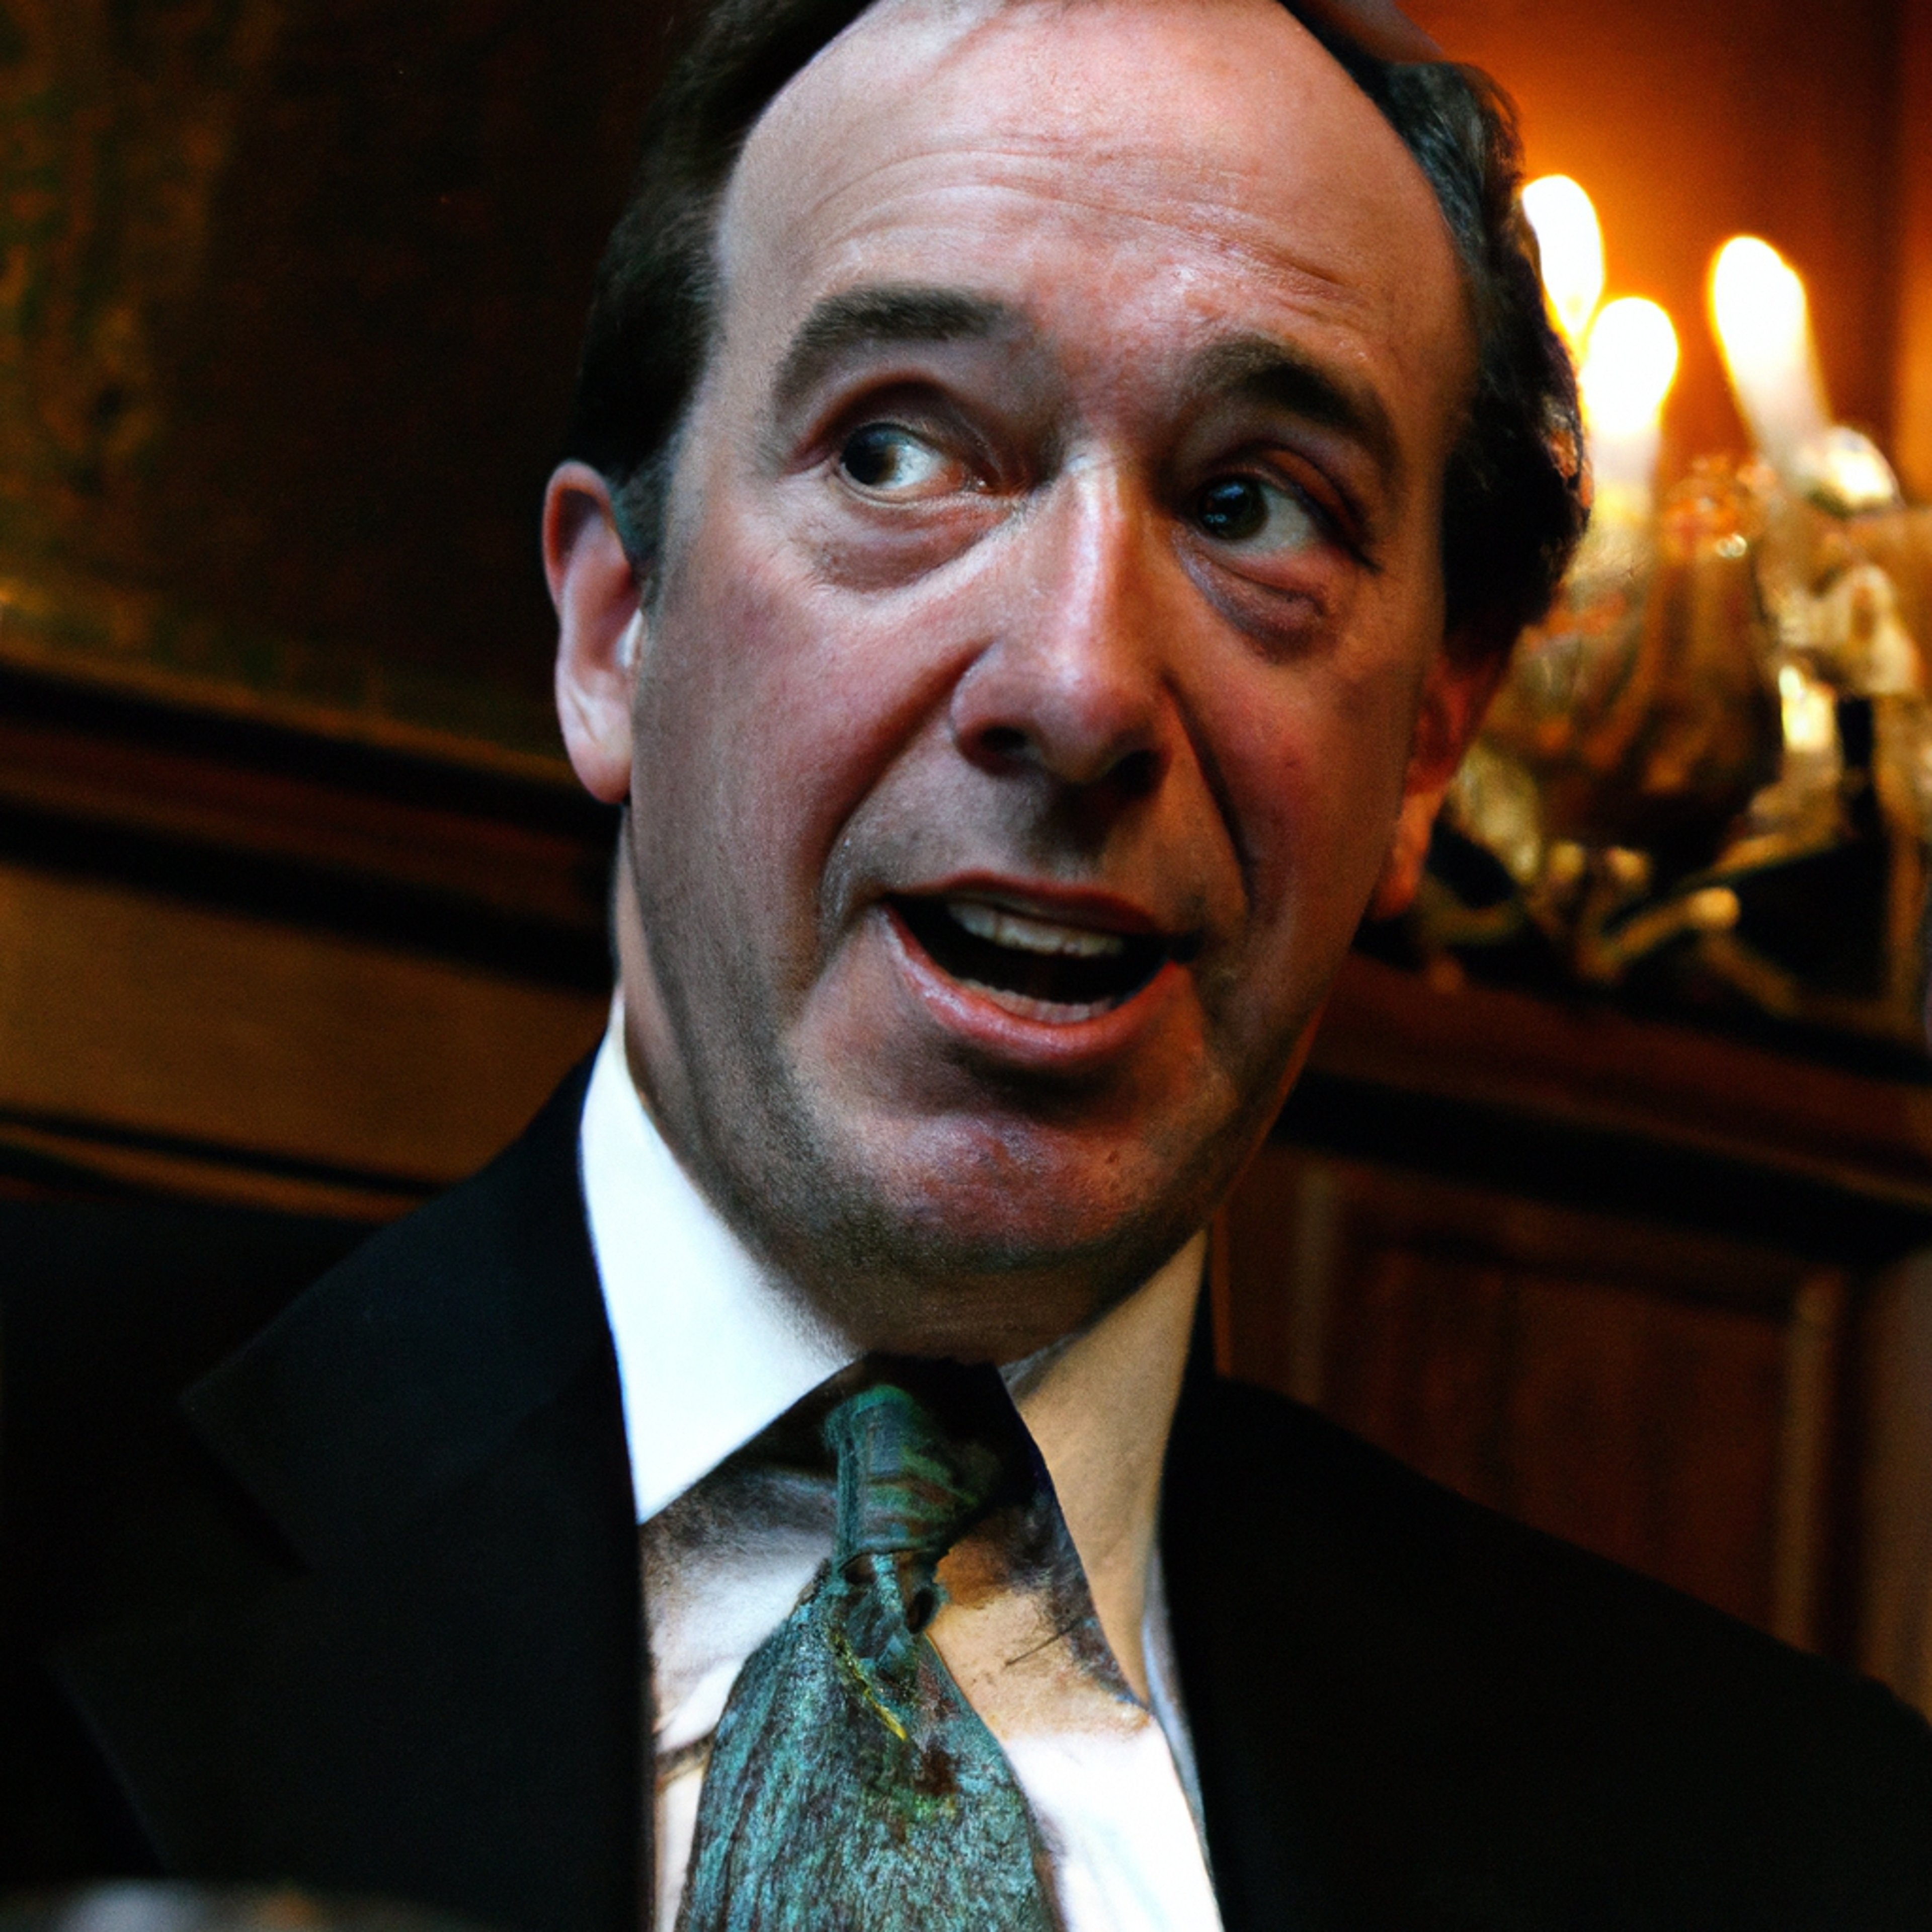 Blackstone CEO says SVB's collapse won't spread across US banking sector